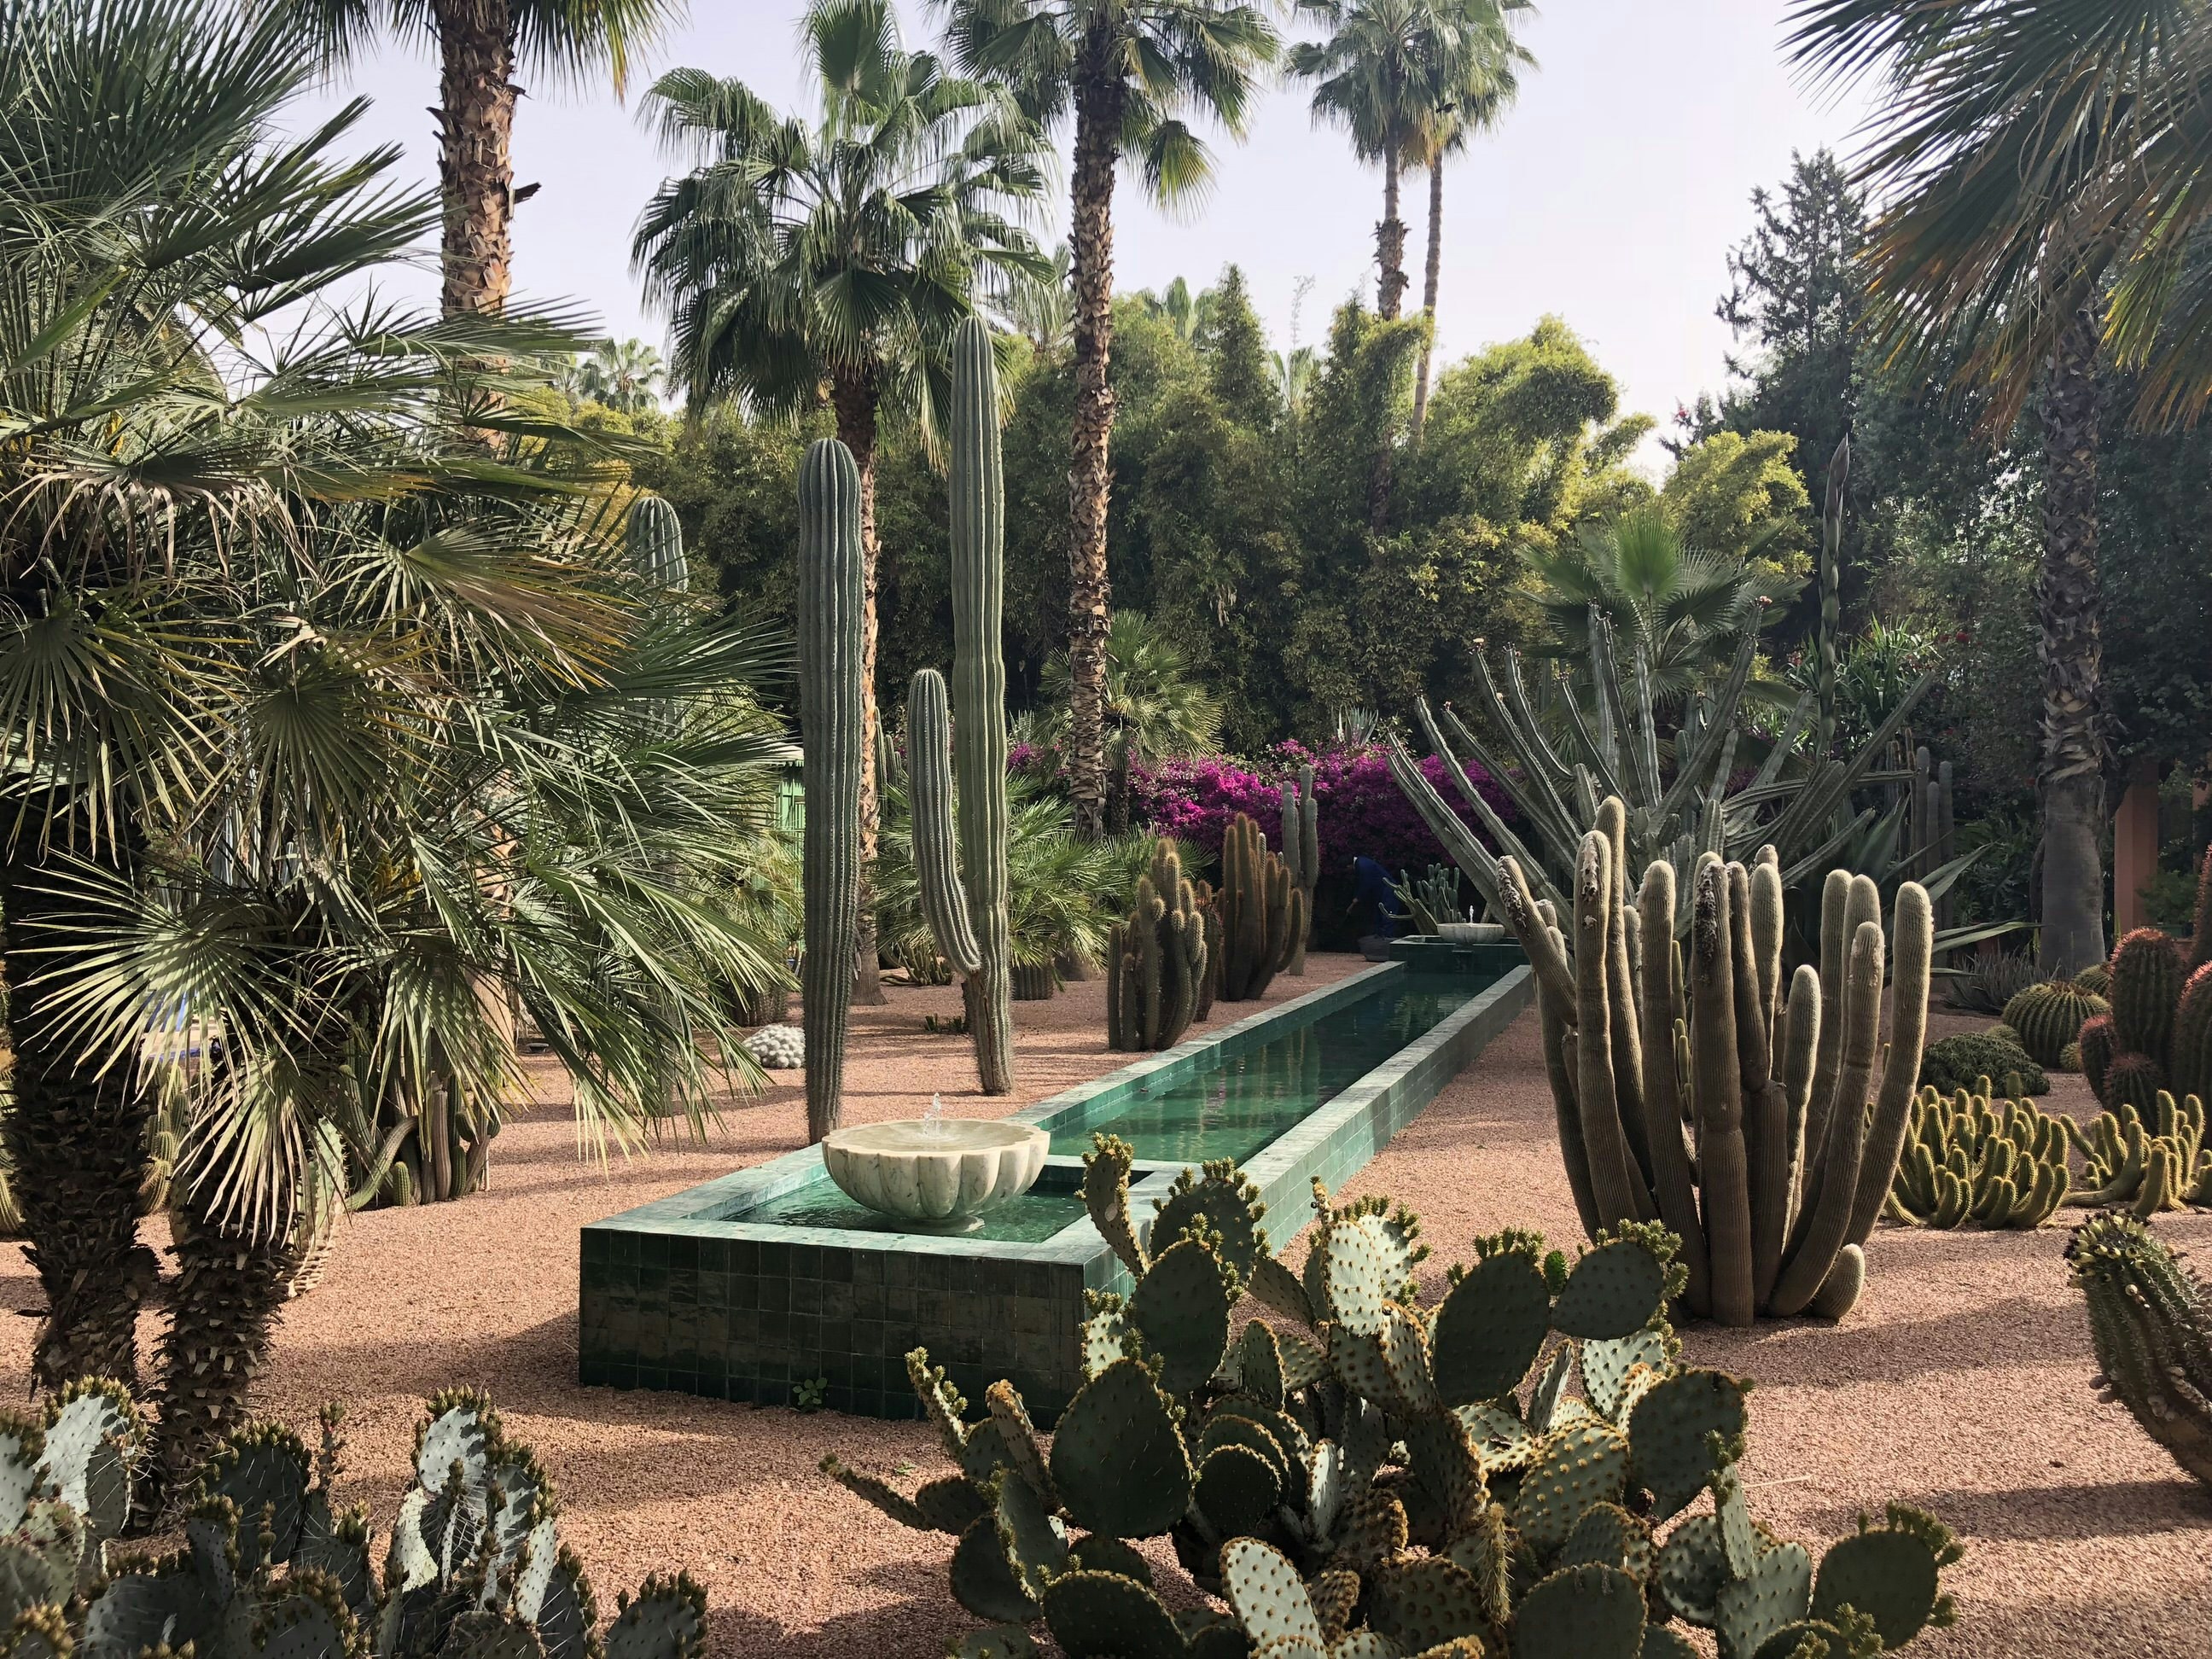 A long, ornate pool/fountain made from aquamarine-coloured tiles sits in pink-hued gravels and is surrounded by palms and cacti.